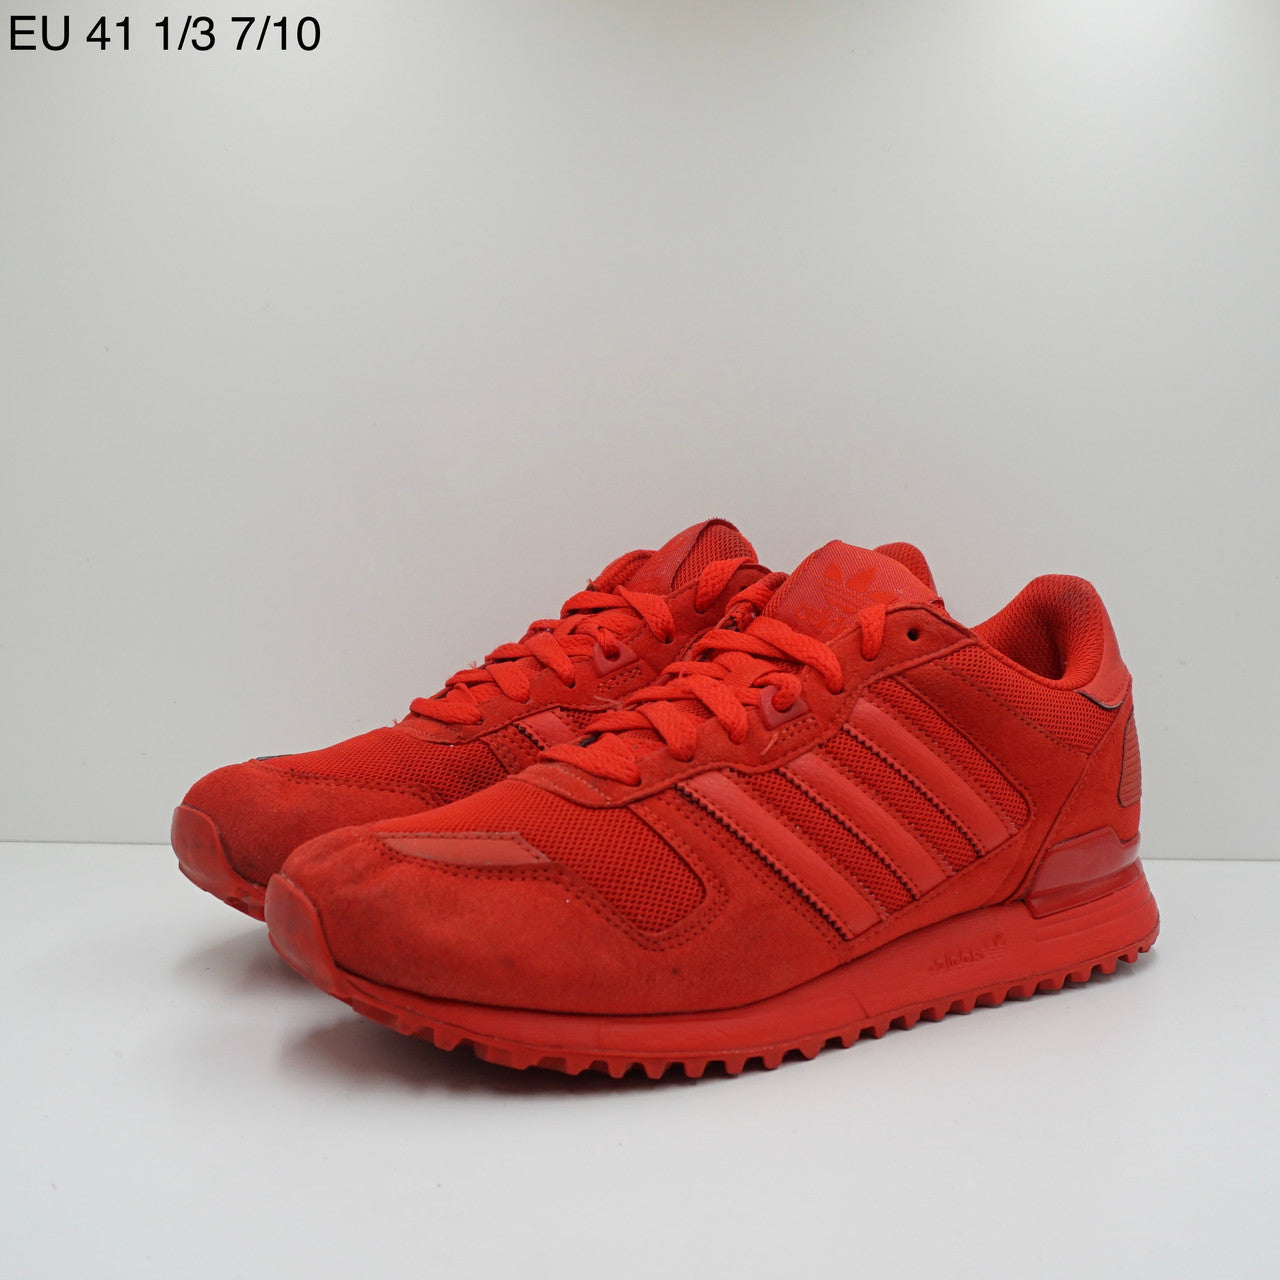 Adidas Zx 700 Red